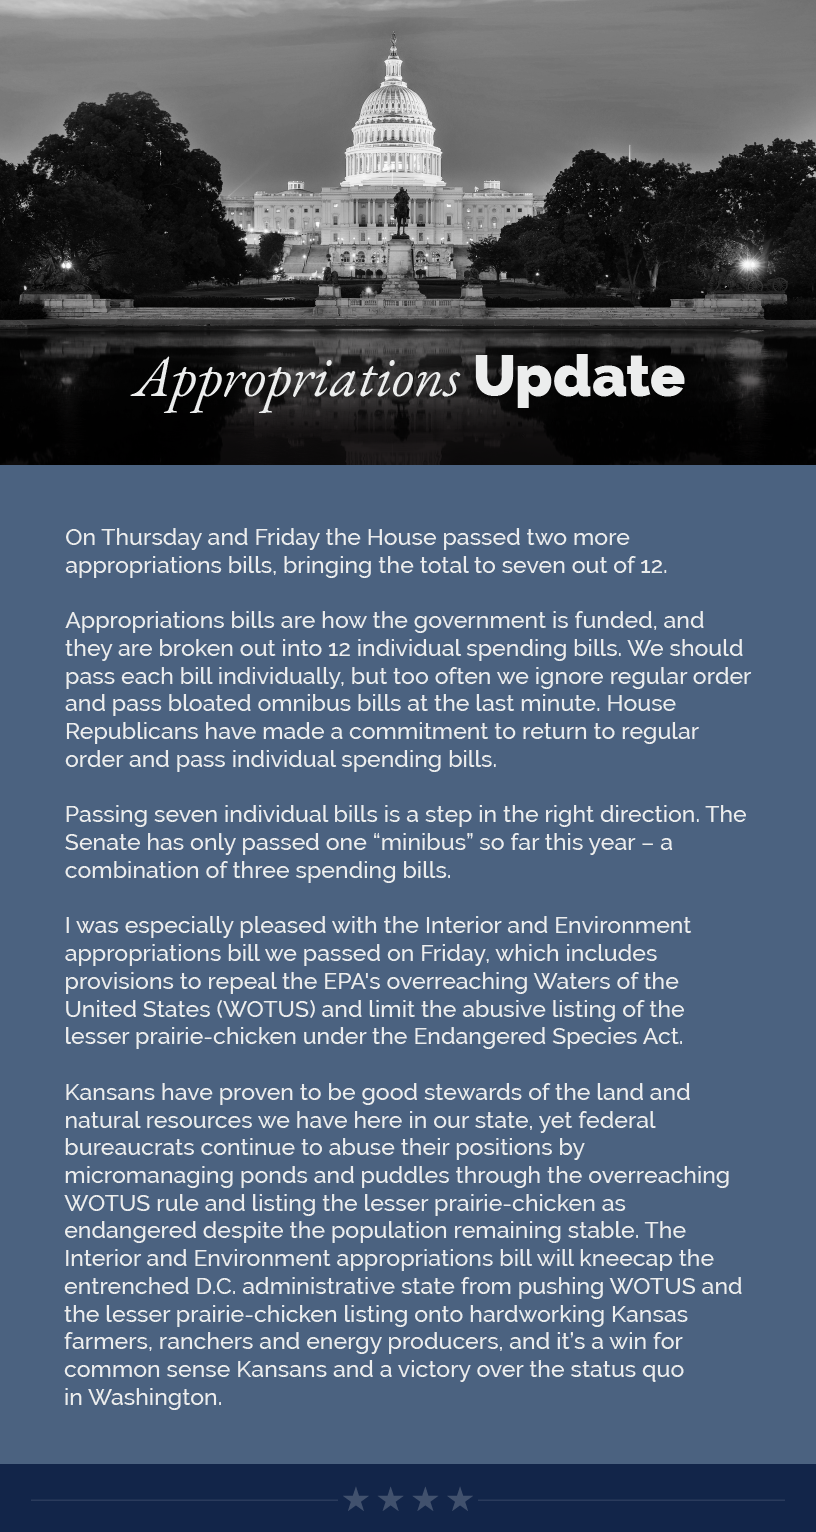 Headline: Appropriation Update. On Thursday and Friday the House passed two more appropriations bills, bringing the total to seven out of 12.  Appropriations bills are how the government is funded, and they are broken out into 12 individual spending bills. We should pass each bill individually, but too often we ignore regular order and pass bloated omnibus bills at the last minute. House Republicans have made a commitment to return to regular order and pass individual spending bills.  Passing seven individual bills is a step in the right direction. The Senate has only passed one “minibus” so far this year – a combination of three spending bills.  I was especially pleased with the Interior and Environment appropriations bill we passed on Friday, which includes provisions to repeal the EPA's overreaching Waters of the United States (WOTUS) and limit the abusive listing of the lesser prairie-chicken under the Endangered Species Act.   Kansans have proven to be good stewards of the land and natural resources we have here in our state, yet federal bureaucrats continue to abuse their positions by micromanaging ponds and puddles through the overreaching WOTUS rule and listing the lesser prairie-chicken as endangered despite the population remaining stable. The Interior and Environment appropriations bill will kneecap the entrenched D.C. administrative state from pushing WOTUS and the lesser prairie-chicken listing onto hardworking Kansas farmers, ranchers and energy producers, and it’s a win for common sense Kansans and a victory over the status quo in Washington.